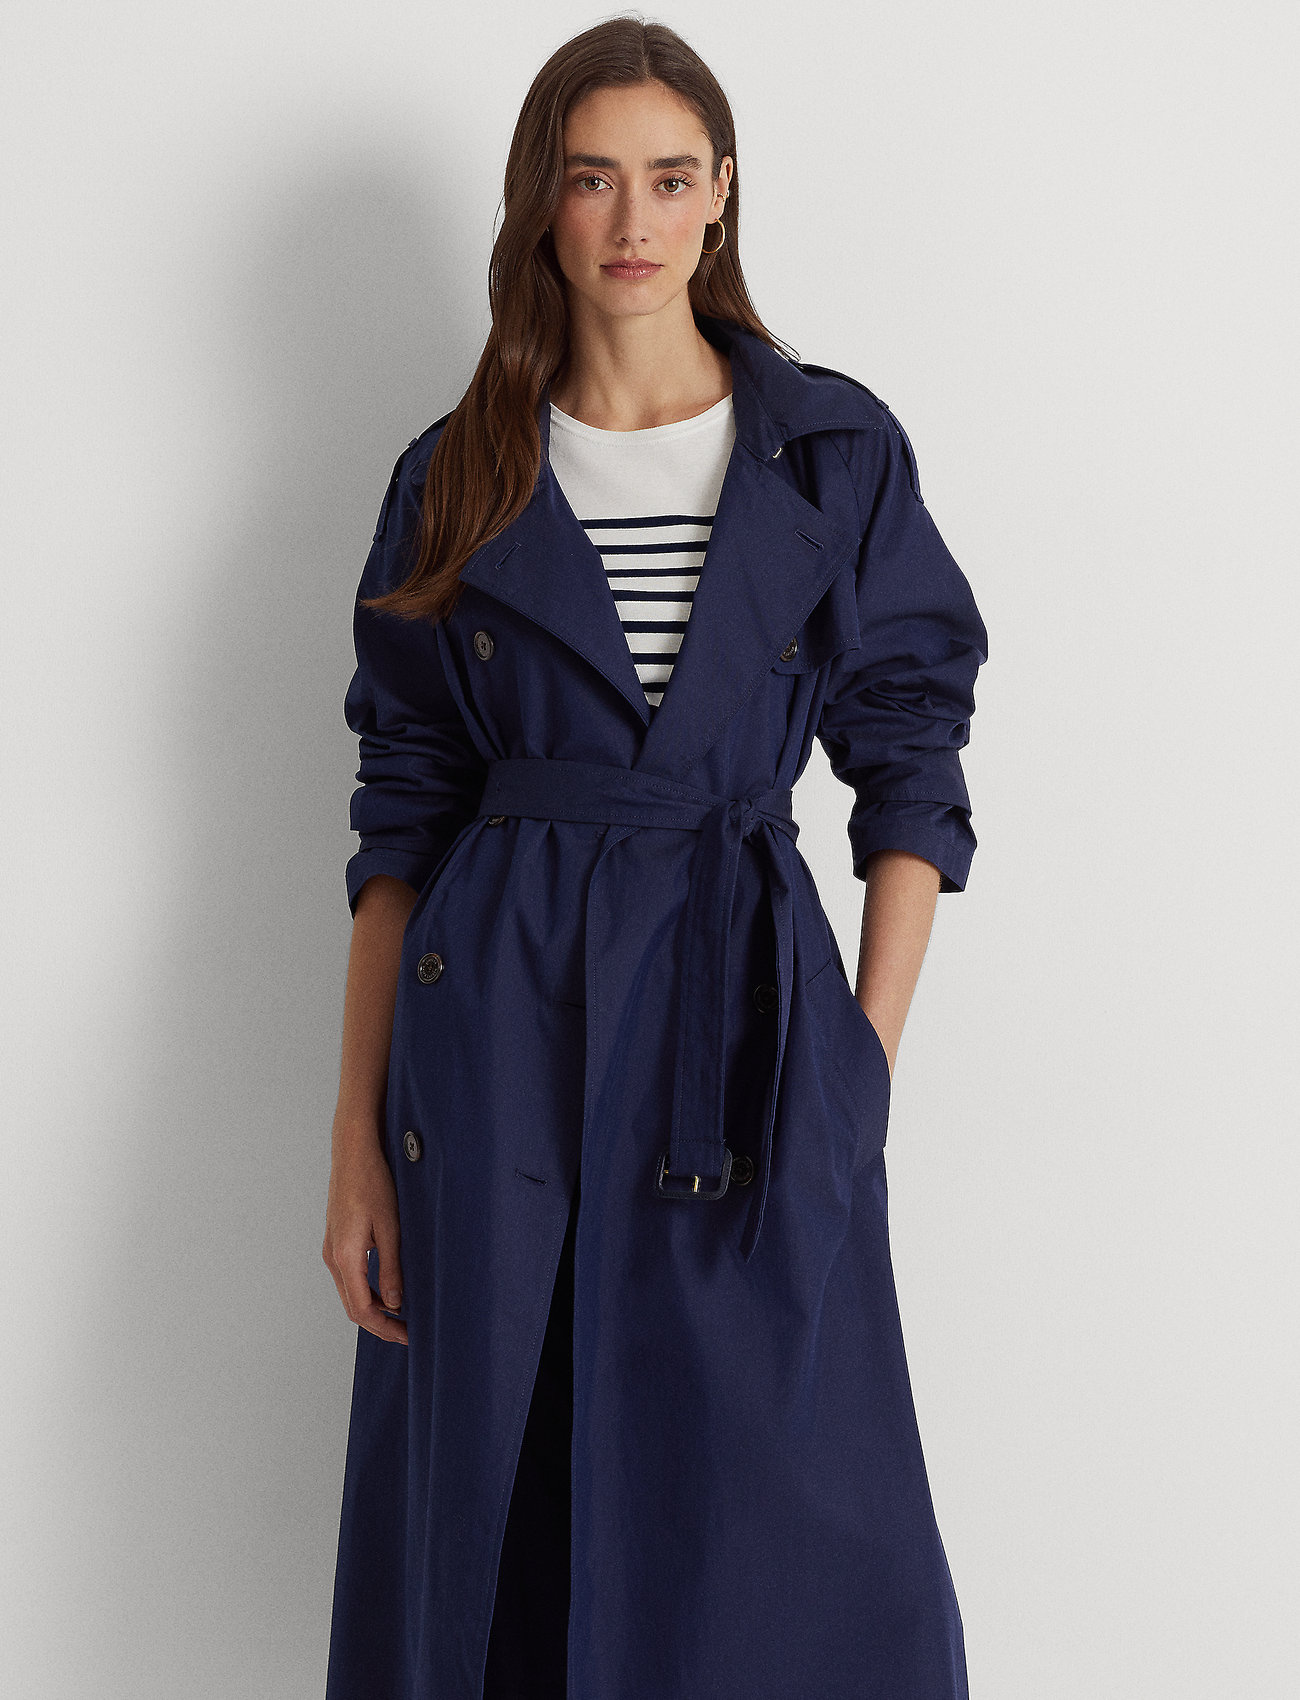 Lauren Ralph Lauren Cotton-blend Twill Trench Coat - 399 €. Buy Trench coats  from Lauren Ralph Lauren online at . Fast delivery and easy returns